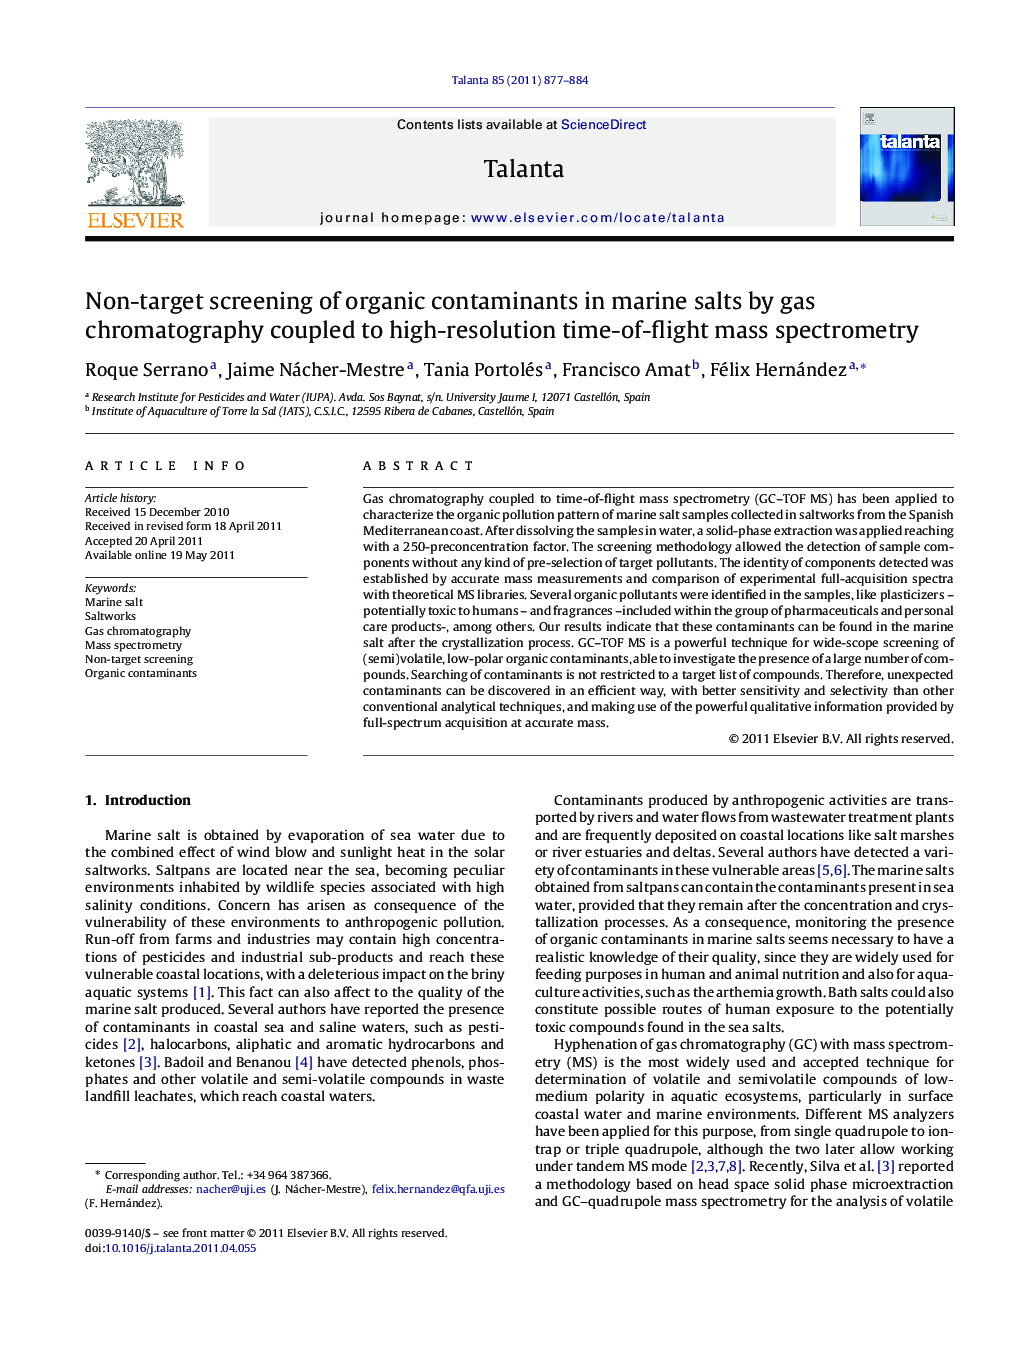 Non-target screening of organic contaminants in marine salts by gas chromatography coupled to high-resolution time-of-flight mass spectrometry